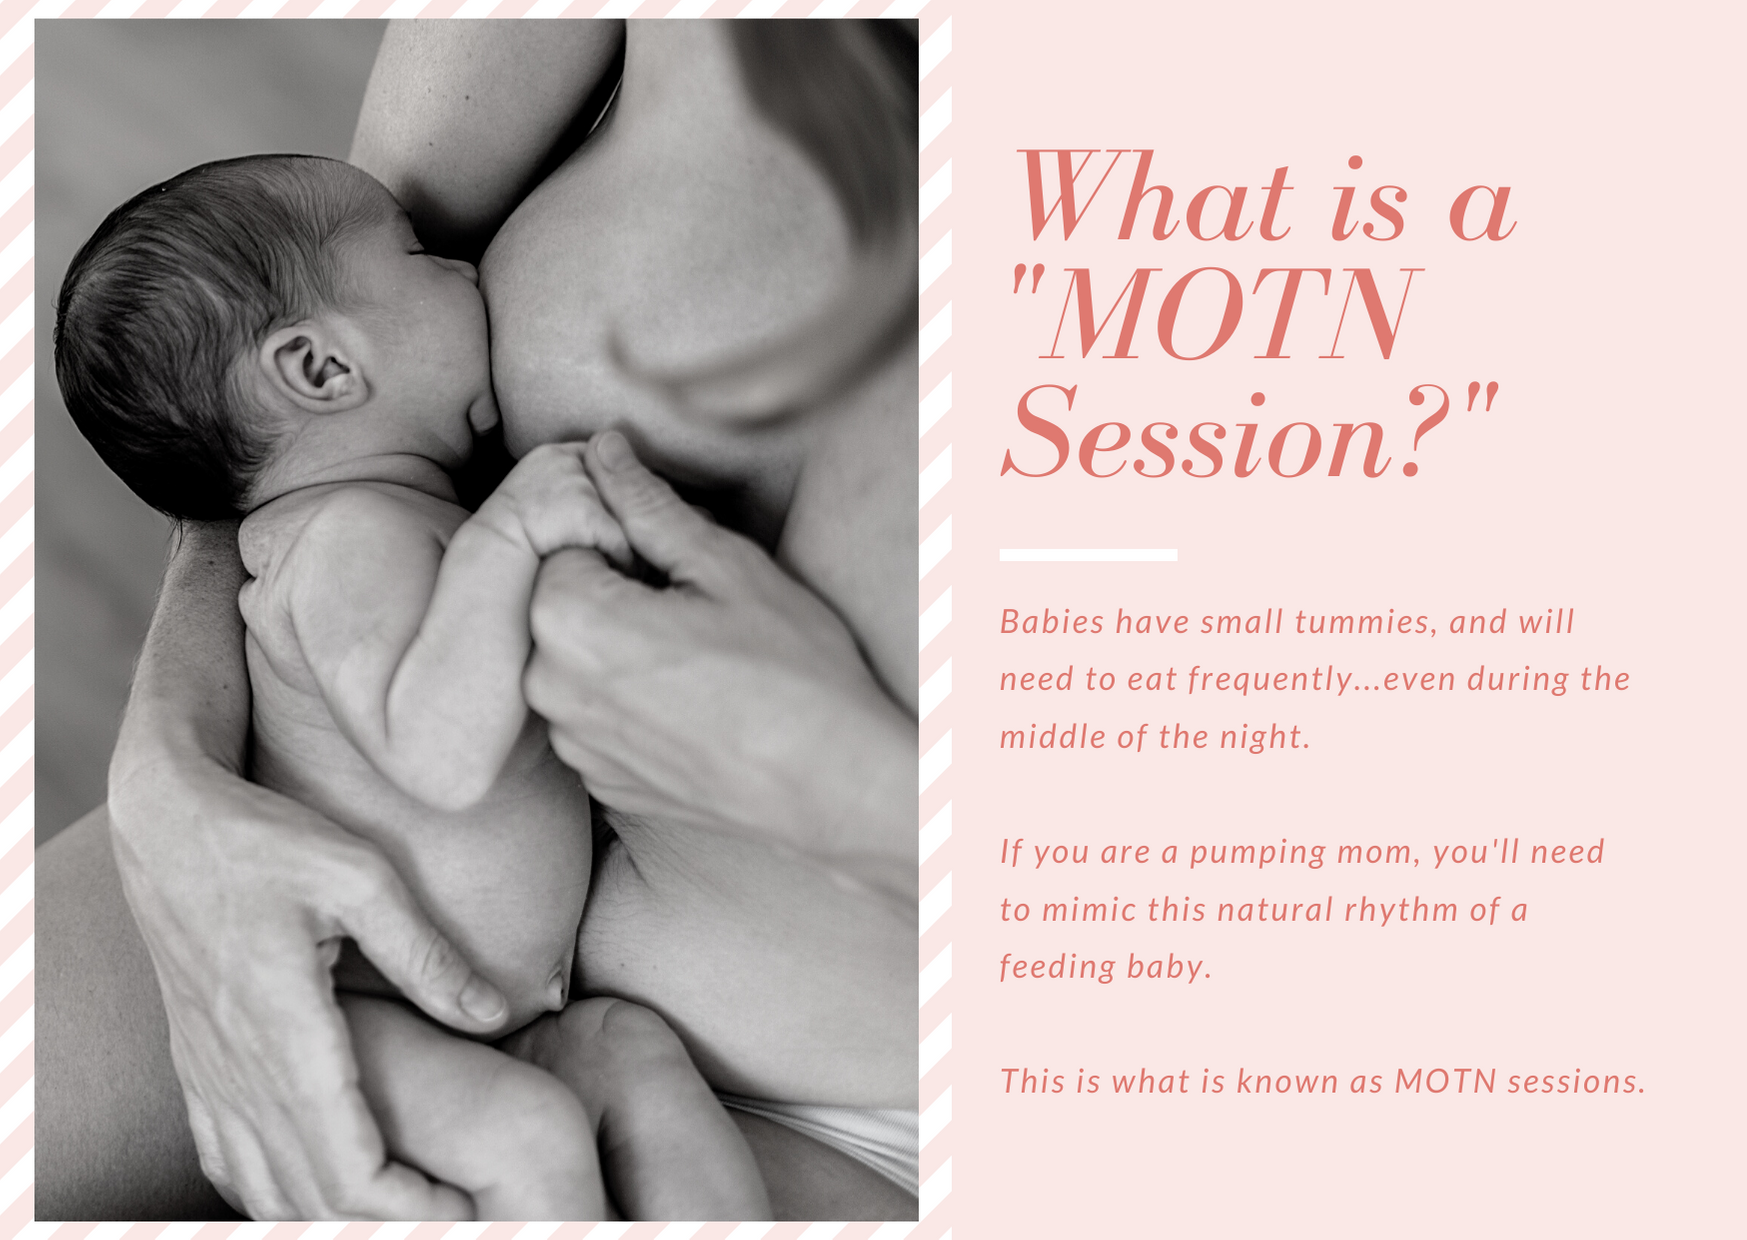 What is an MOTN session?